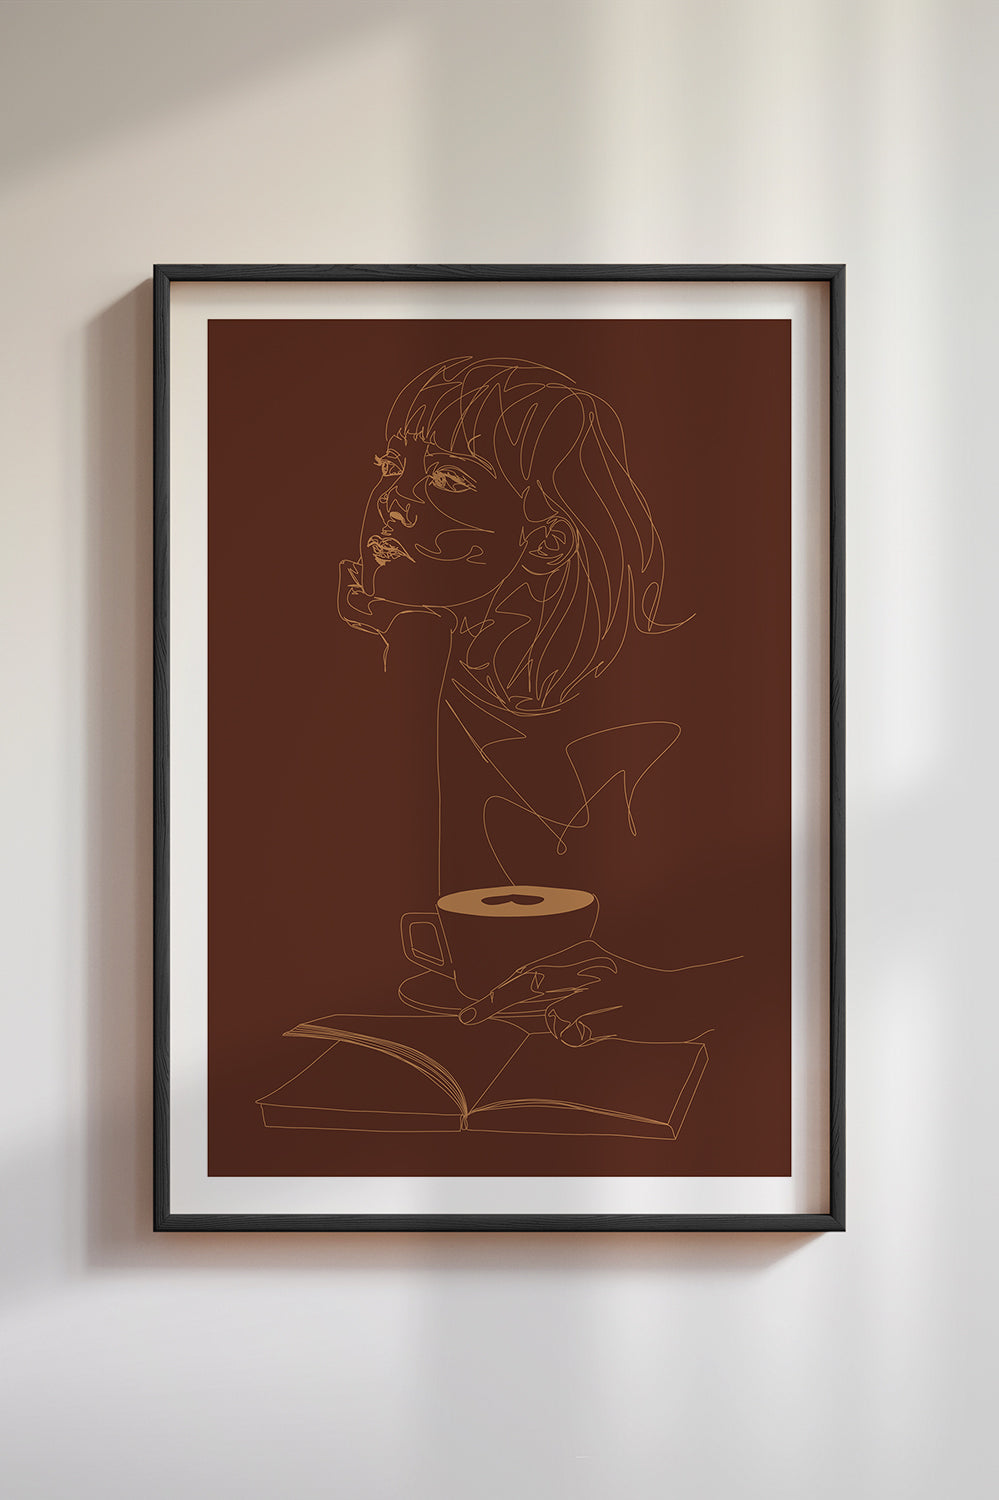 ART PRINT. Me & coffee are a thing.